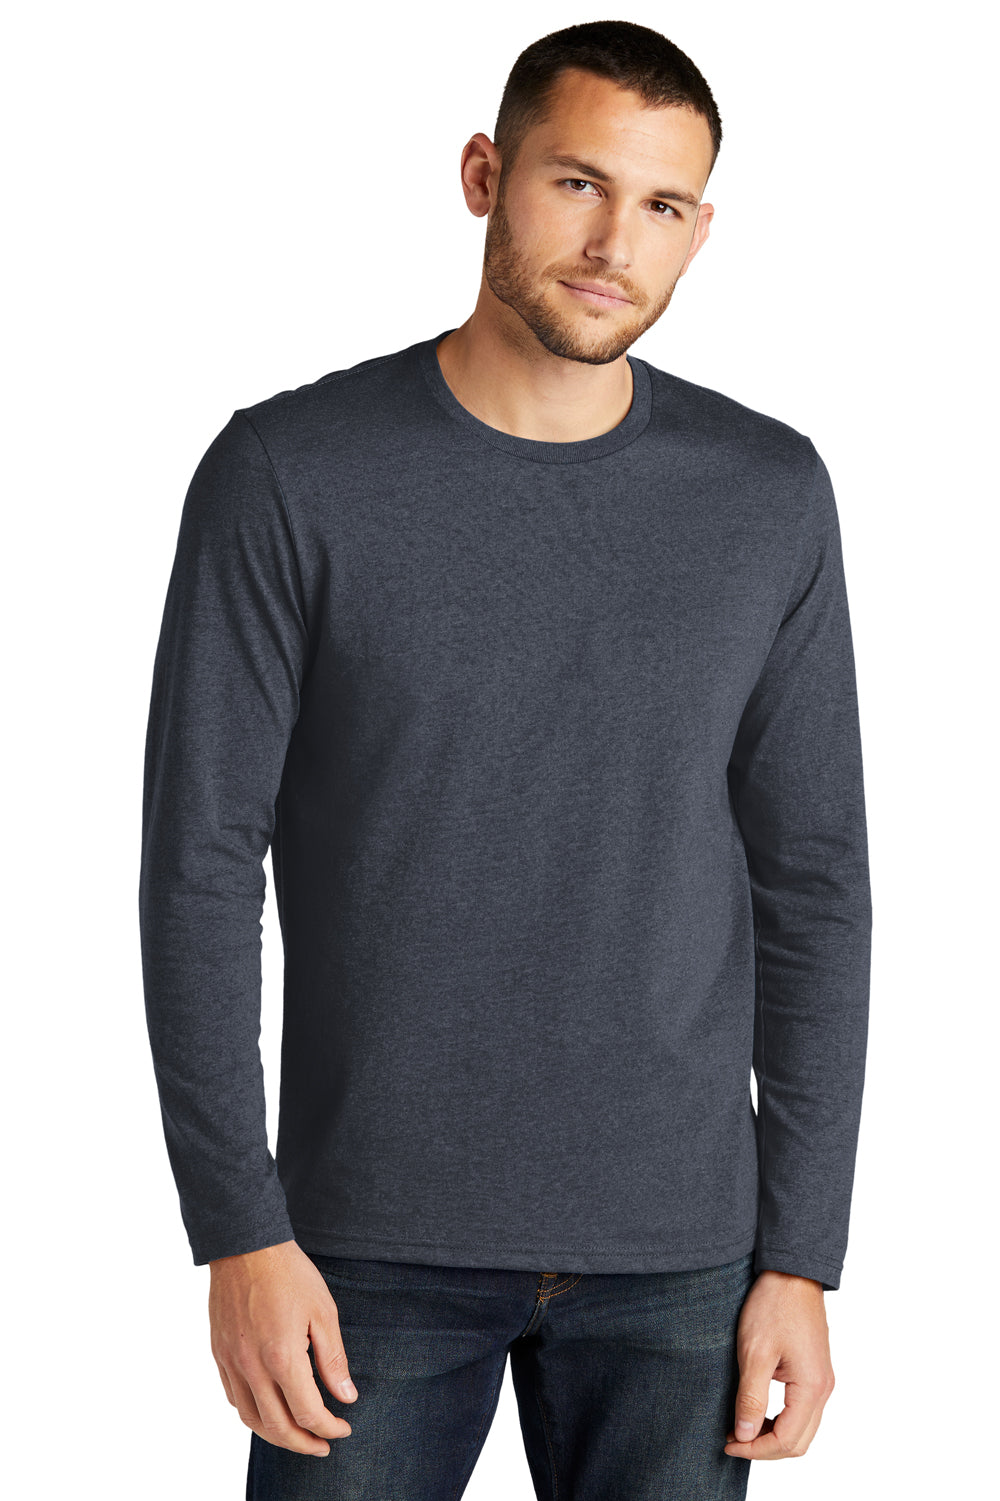 District DT8003 Re-Tee Long Sleeve Crewneck T-Shirt Heather Navy Blue Front